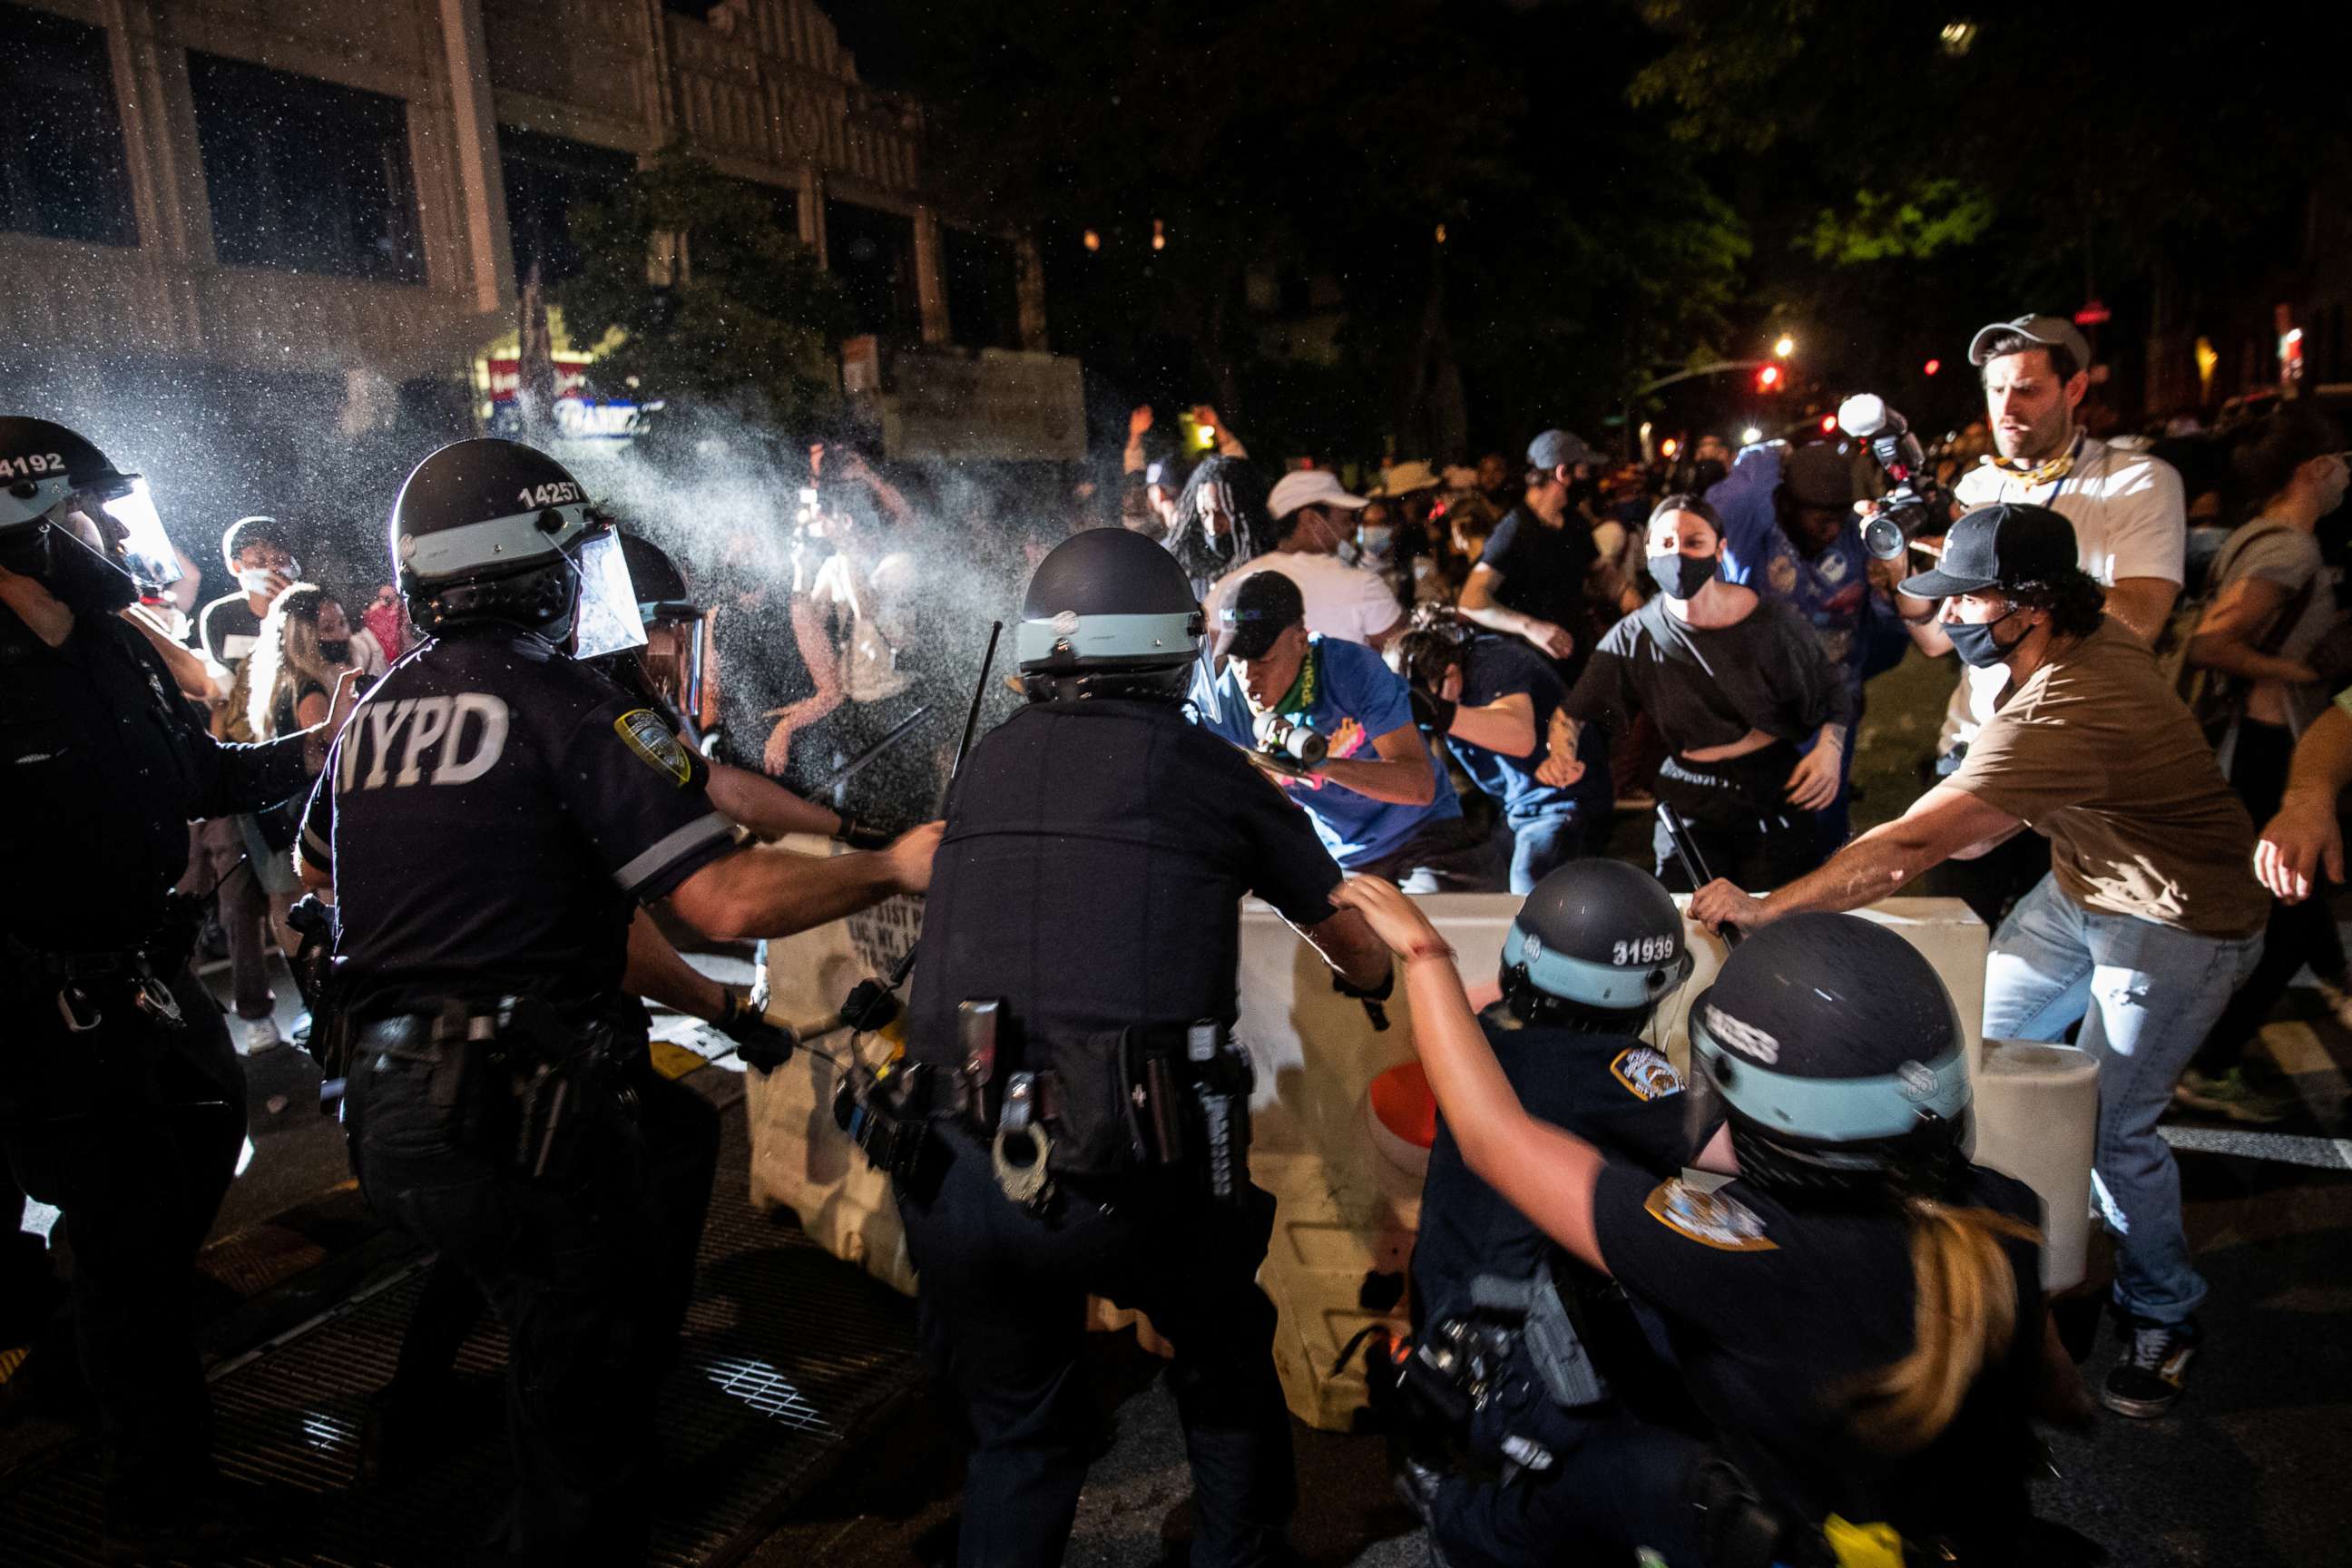 PHOTO: A police officer sprays protesters during a march against the death in Minneapolis police custody of George Floyd, in Brooklyn, New York, May 30, 2020.